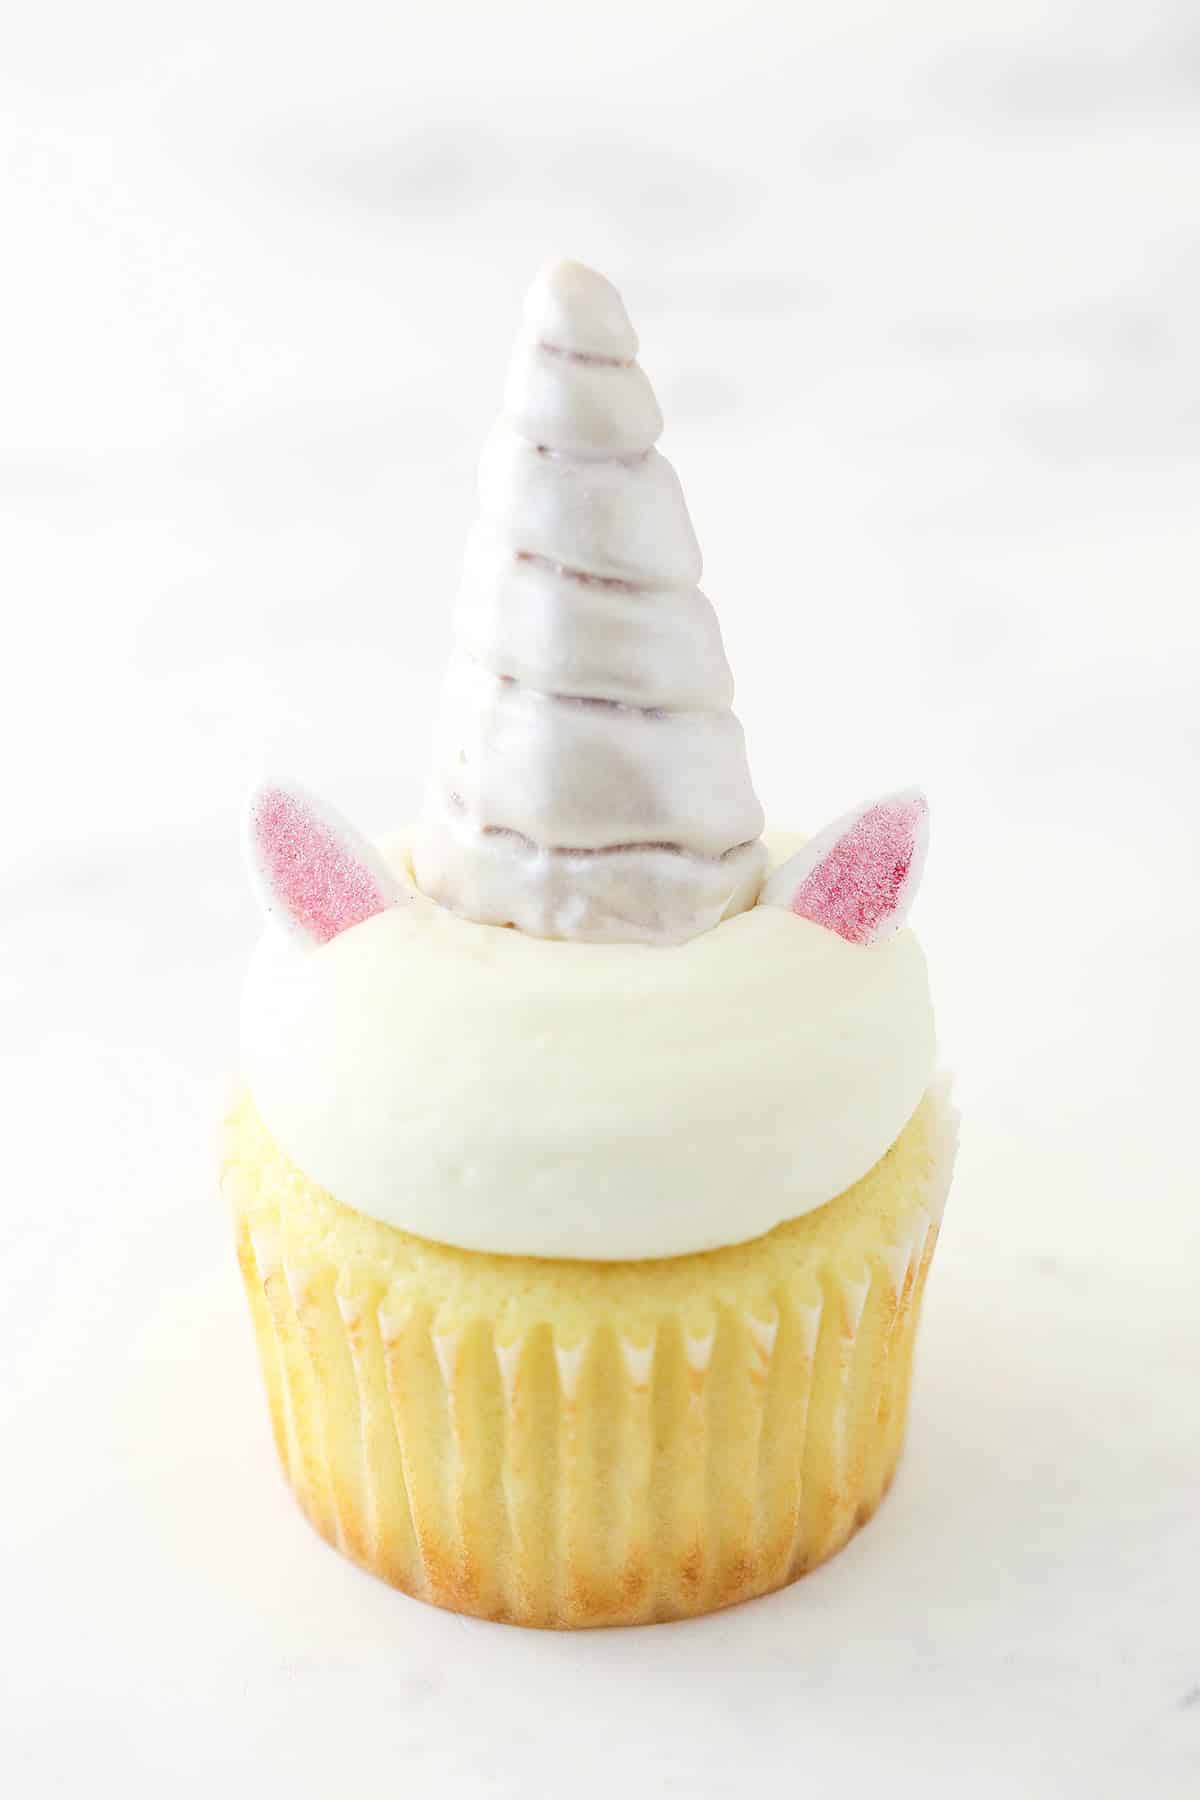 Vanilla cupcake with buttercream, a horn, and two ears.